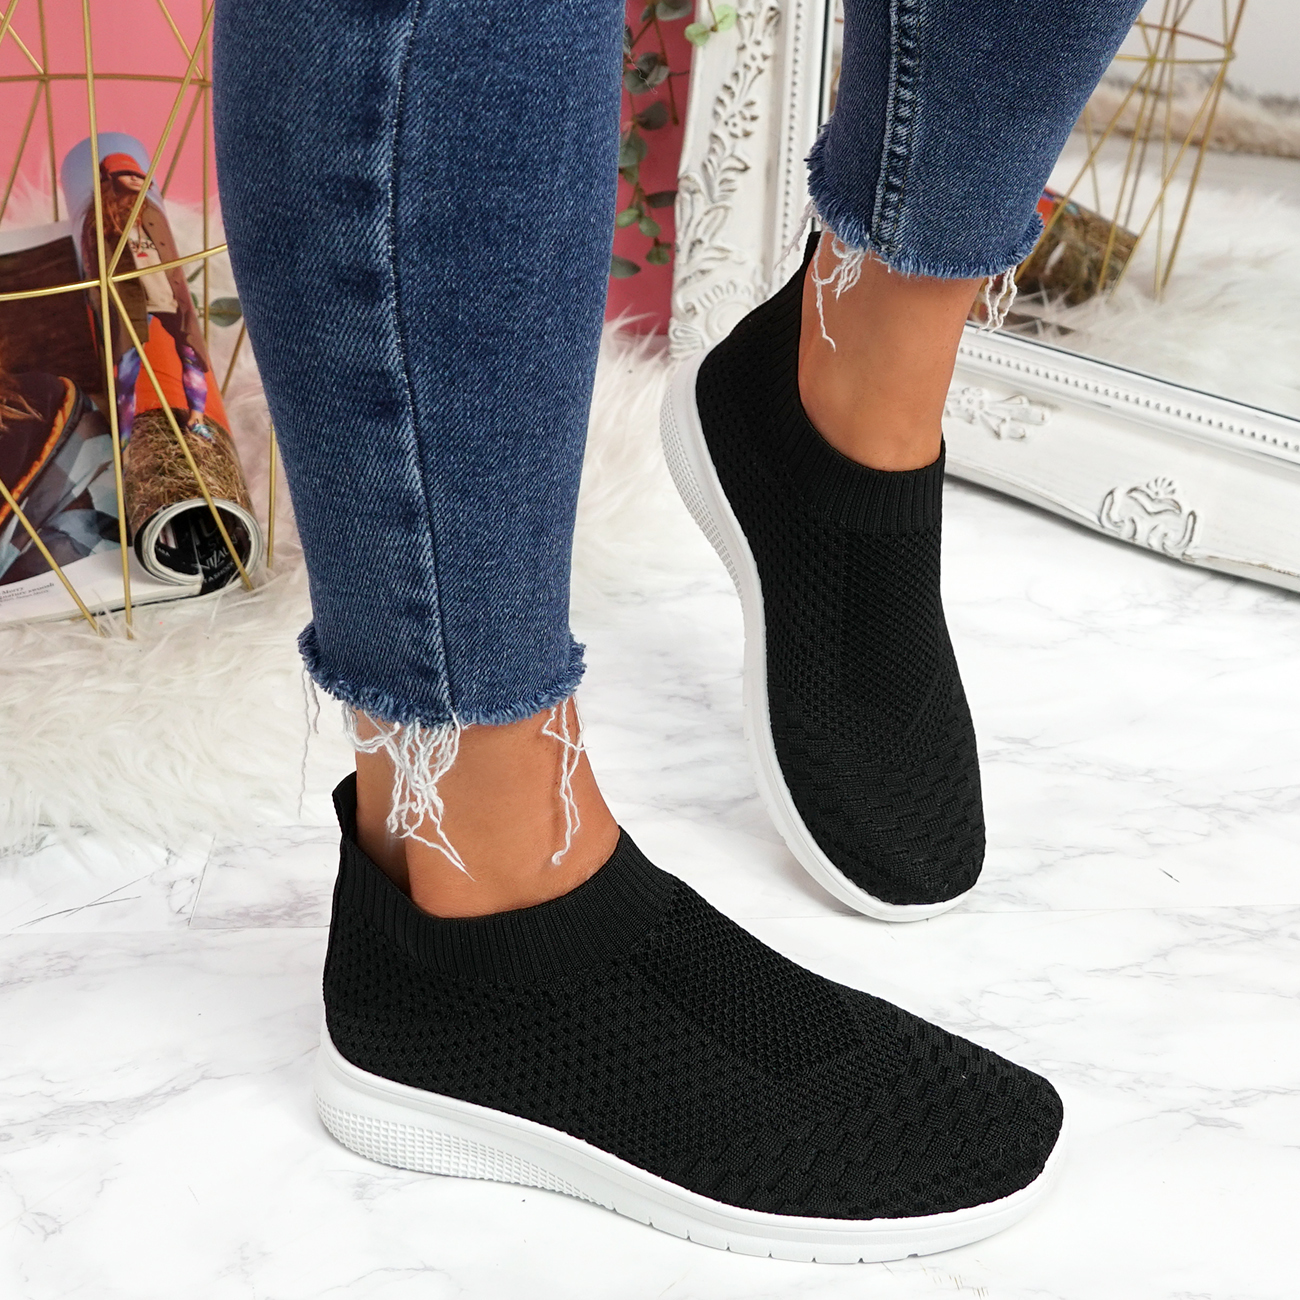 WOMENS LADIES SOCK SNEAKERS WALKING TRAINERS CYCLING WOMEN SHOES SIZE ...